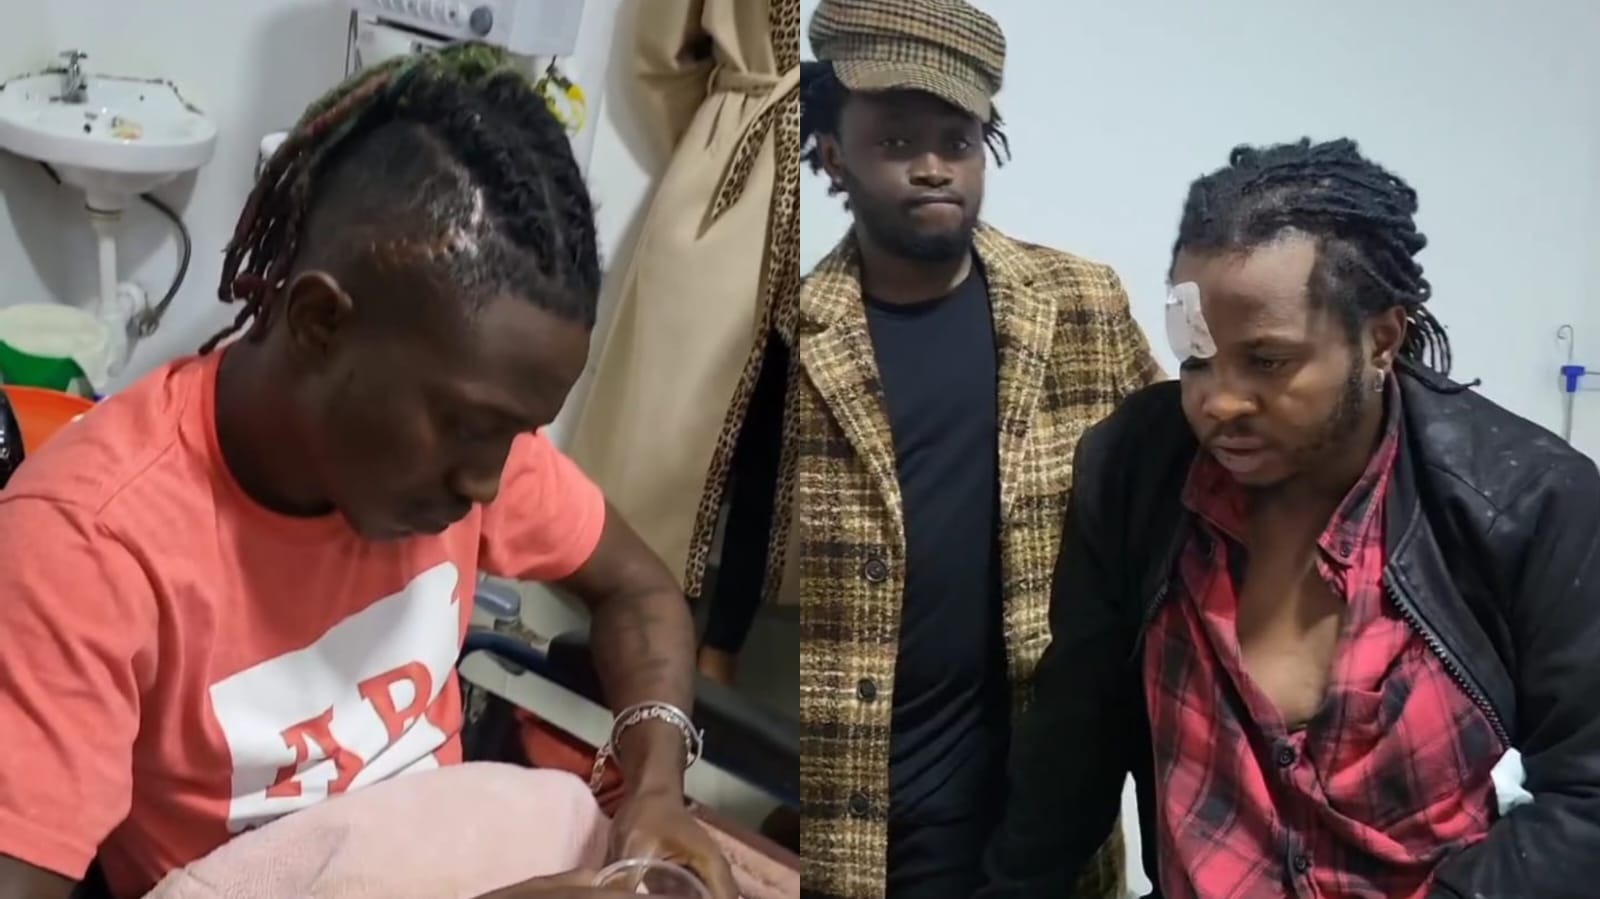 Mr Seed And DK Kwenye Beat Release Statement After Surviving A Car Accident That Claimed 3 Lives